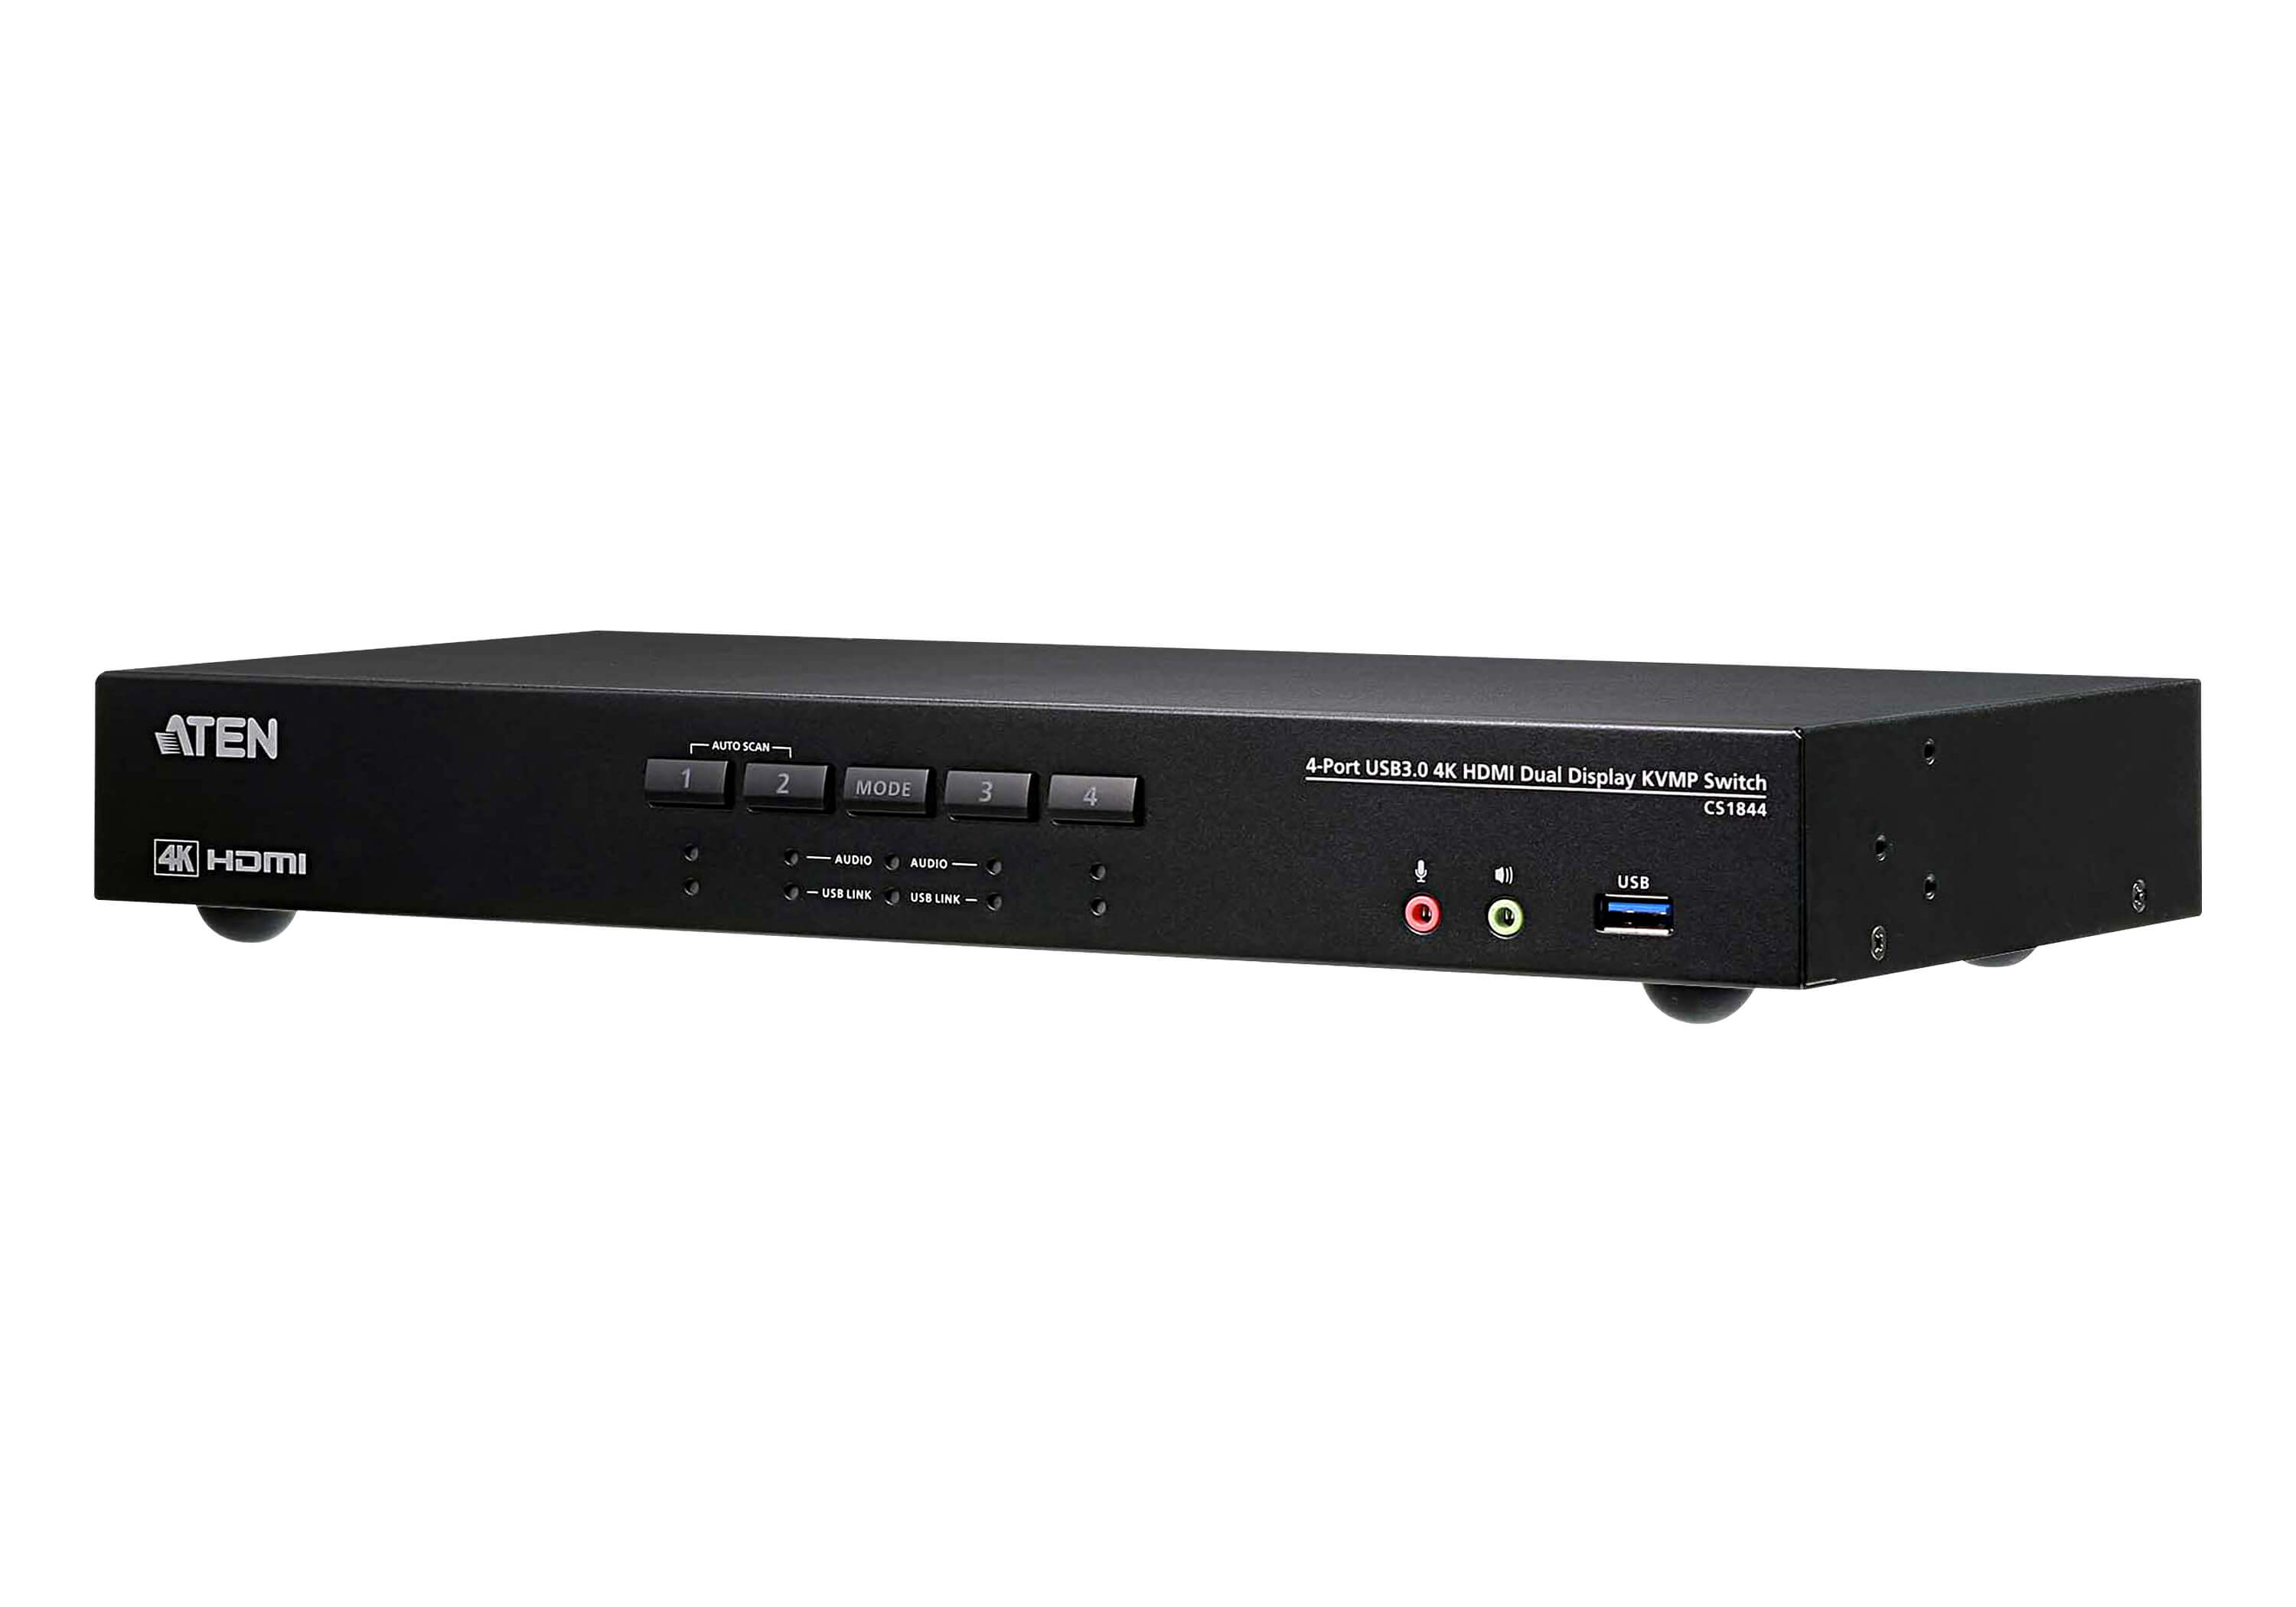 KVM Switches/Aten: Aten, Desktop, KVMP, Switch, 4, Port, Dual, Display, 4k, HDMI, w/, audio, Cables, Included, 2x, USB, Port, Selection, Via, Front, Panel, 